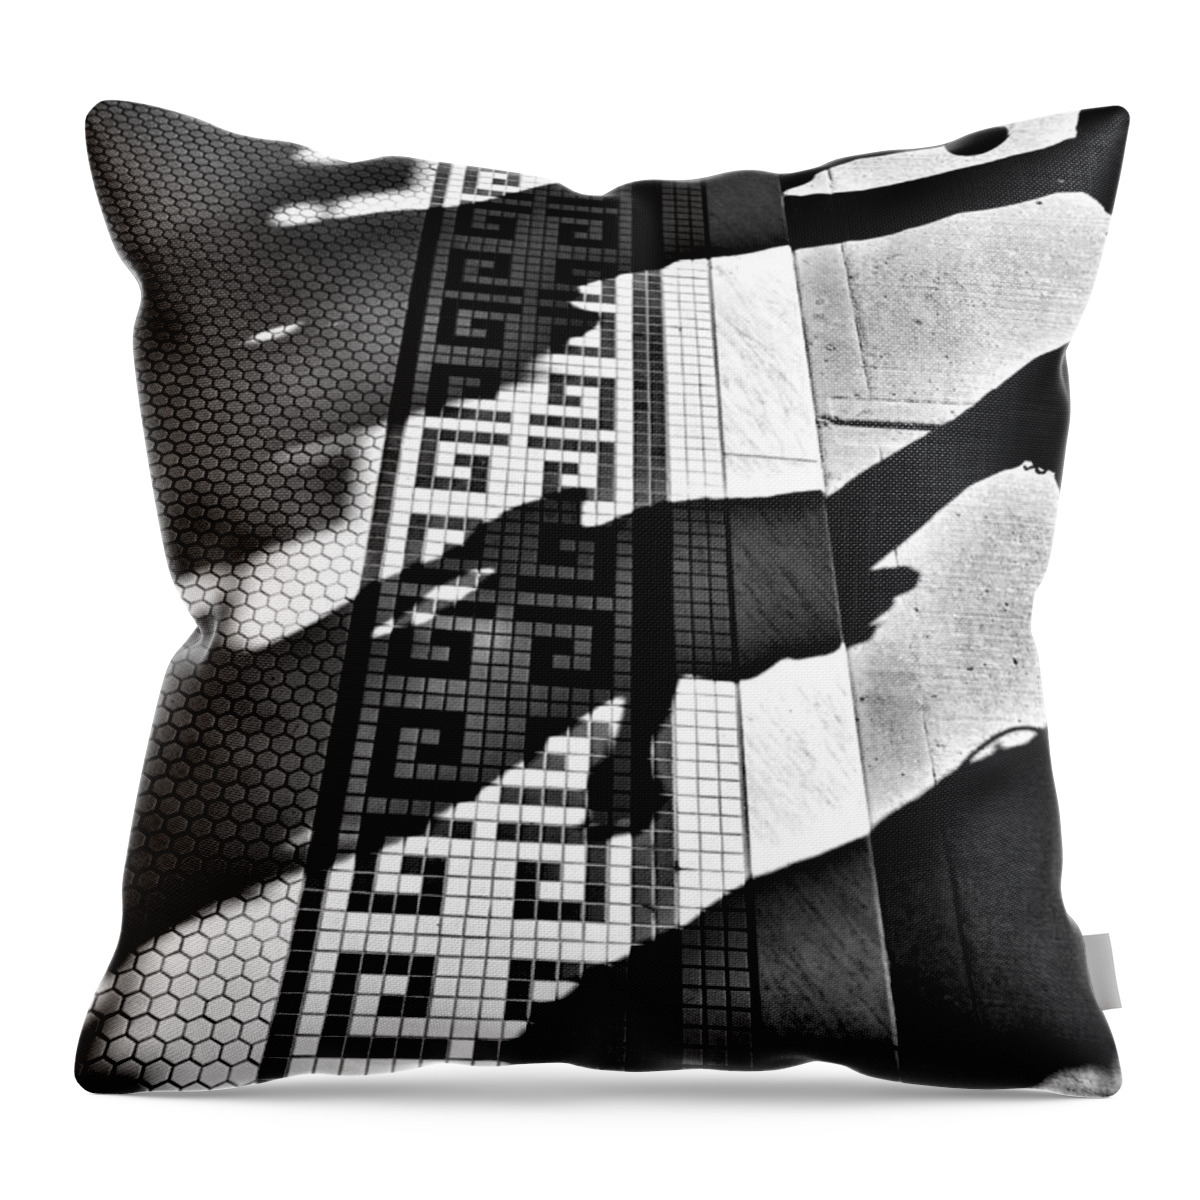 Street Throw Pillow featuring the photograph Street To Stone by J C